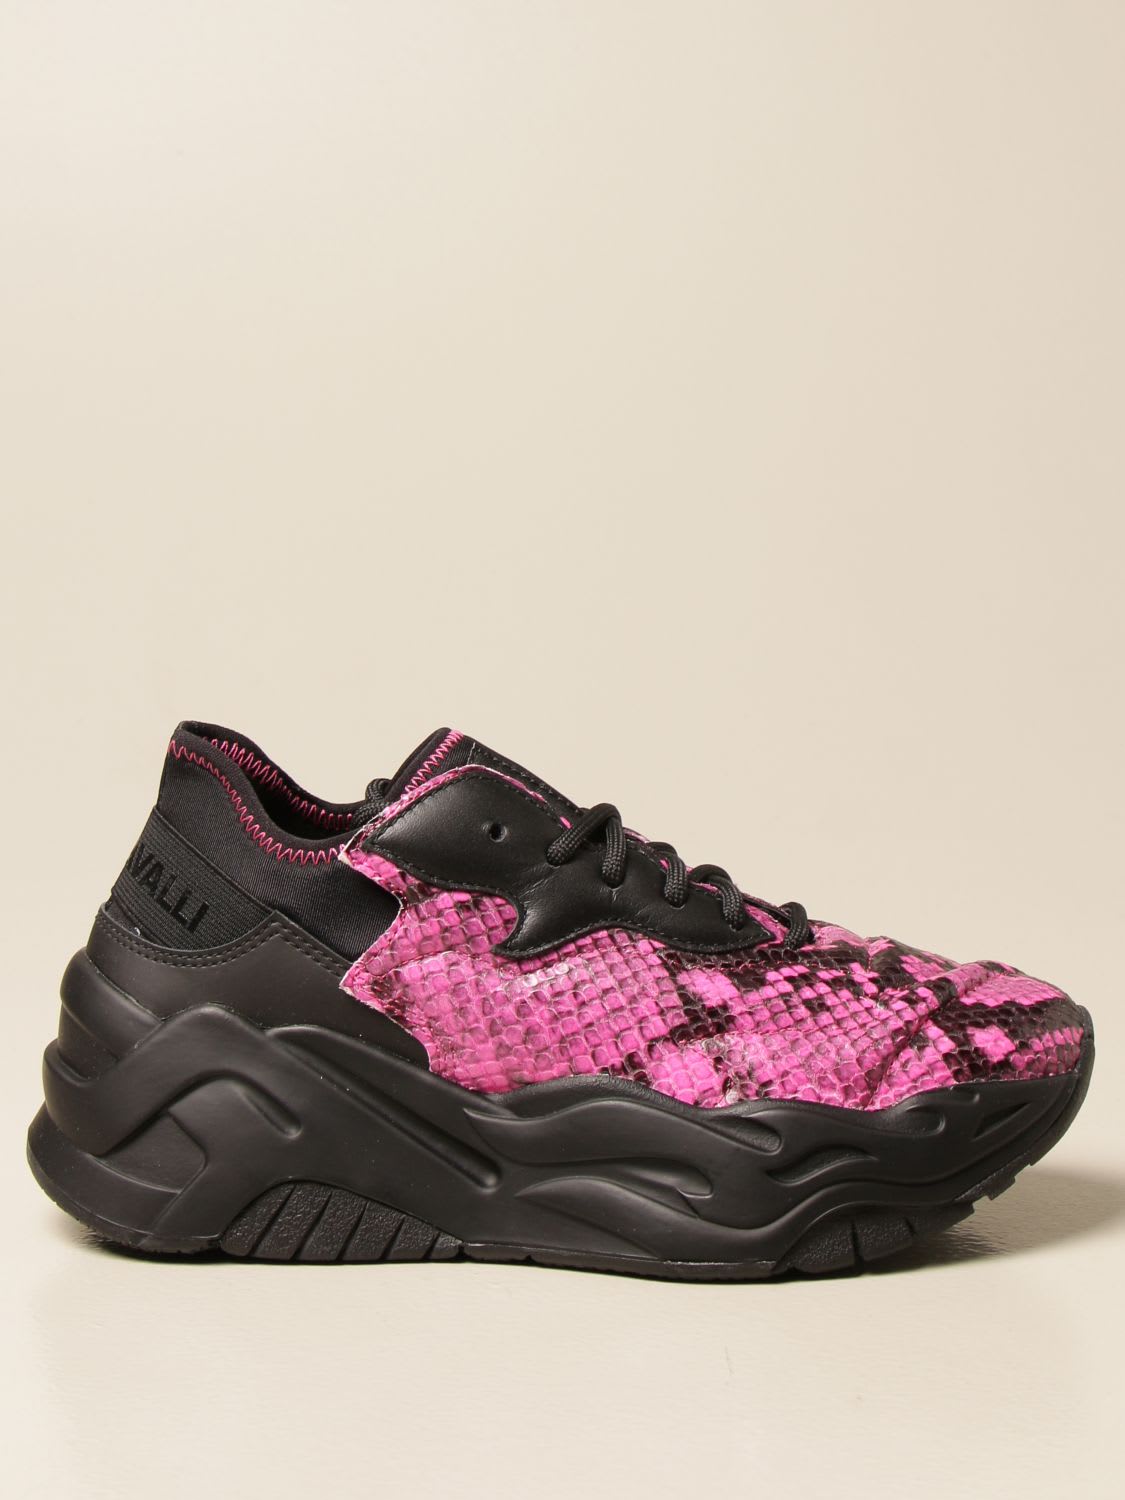 Just Cavalli Sneakers P1thon Just Cavalli Sneakers In Leather With Python Print And Neoprene